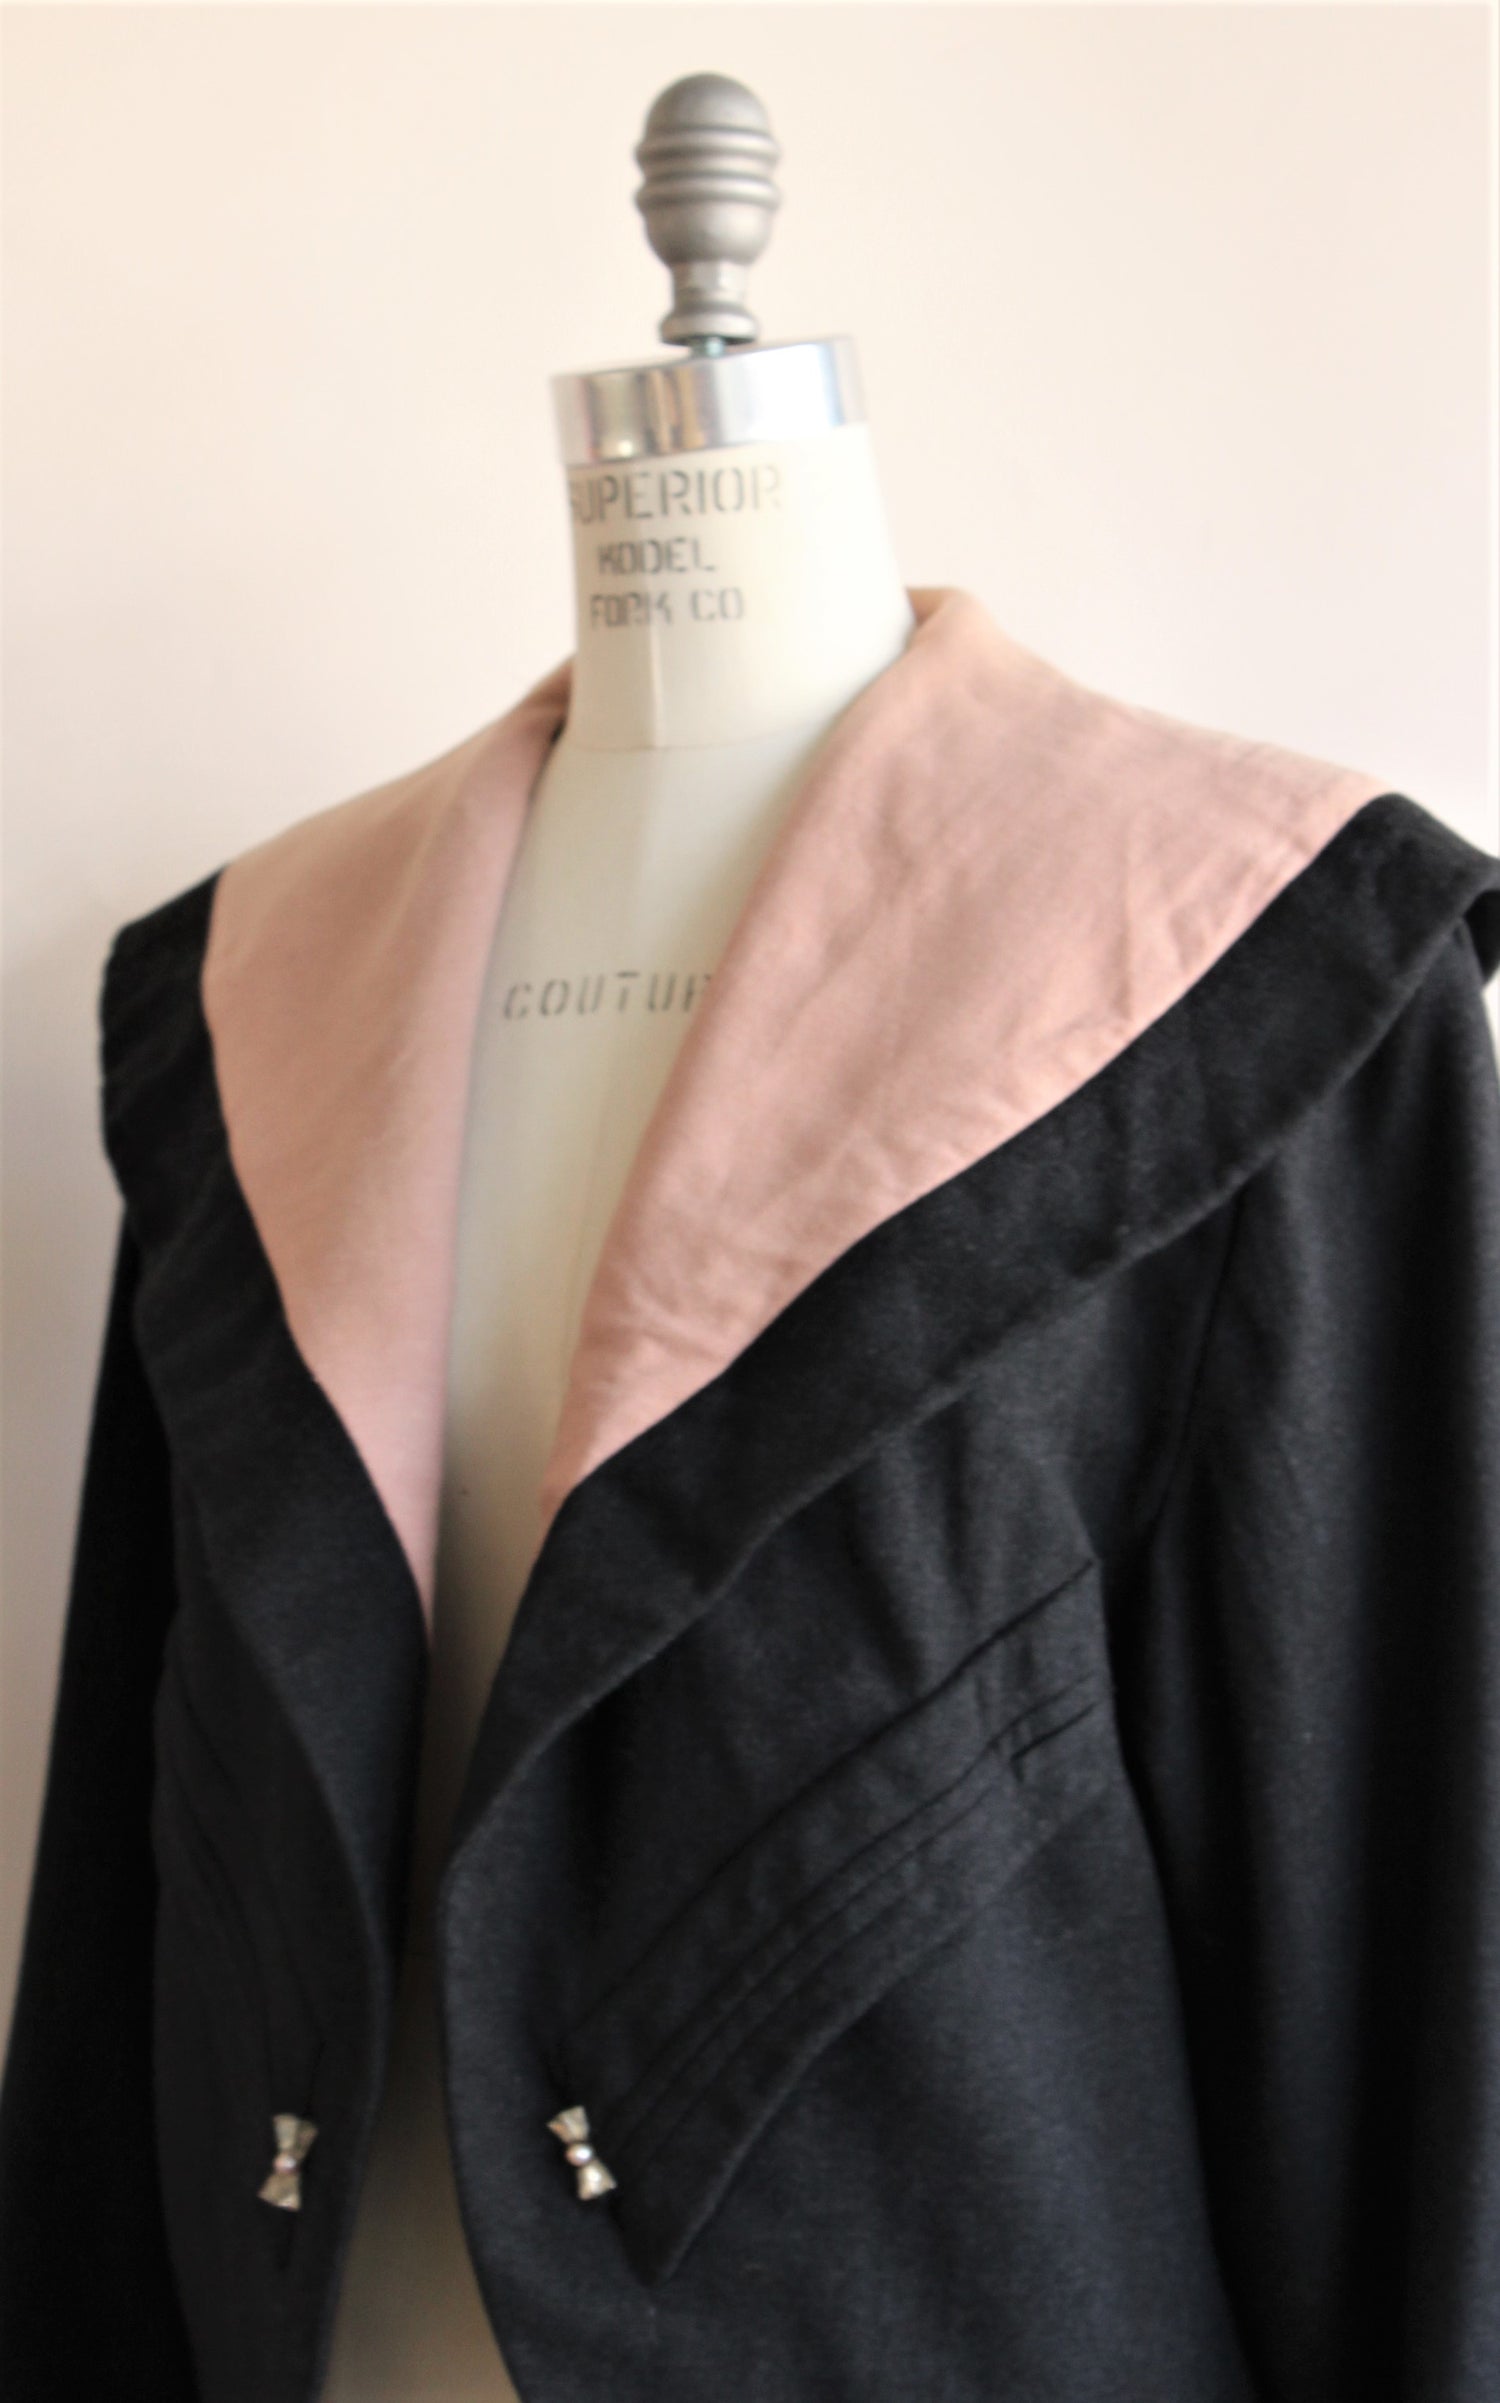 VIntage 1950s Darkest Gray Wool Jacket With Pink Lining By Buddy Bates